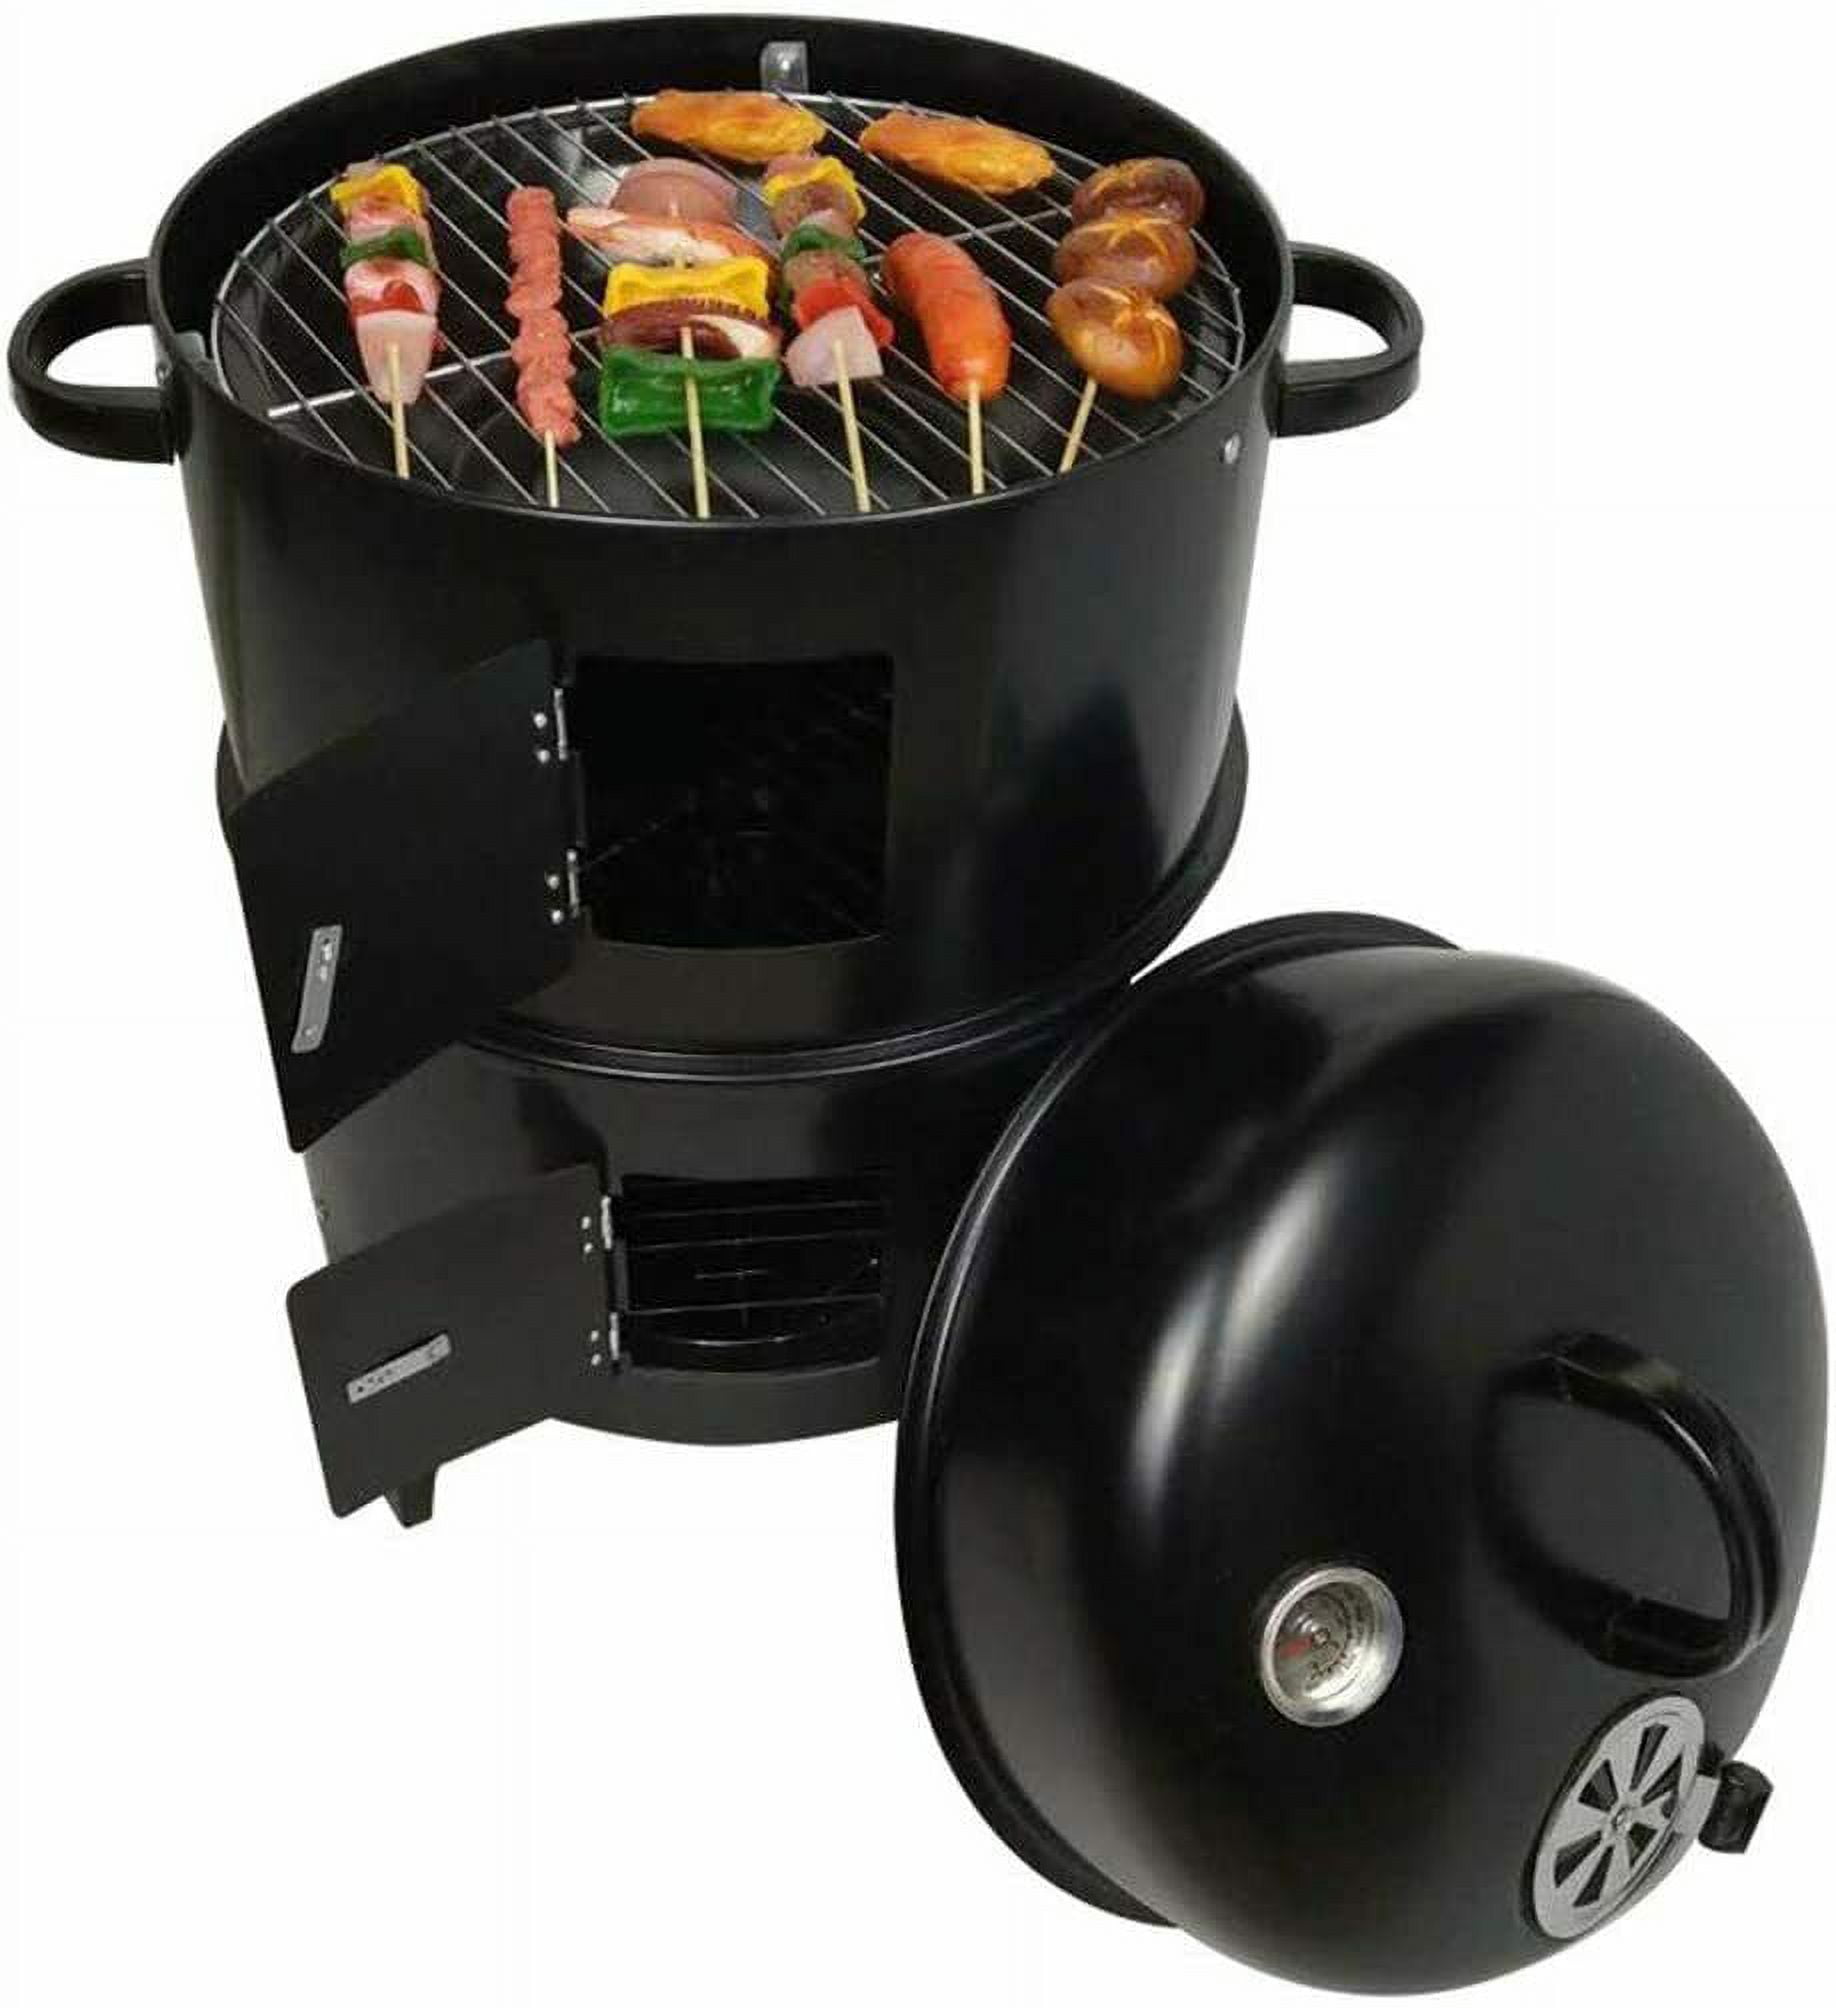 Hiking Charcoal Barbeque Grill 3-in-1 Hunting Smoker Suitable Grill Backyard Cooking BBQ Round Smoker Grill Camping Party Outdoor Vertical for 3-Tier Family